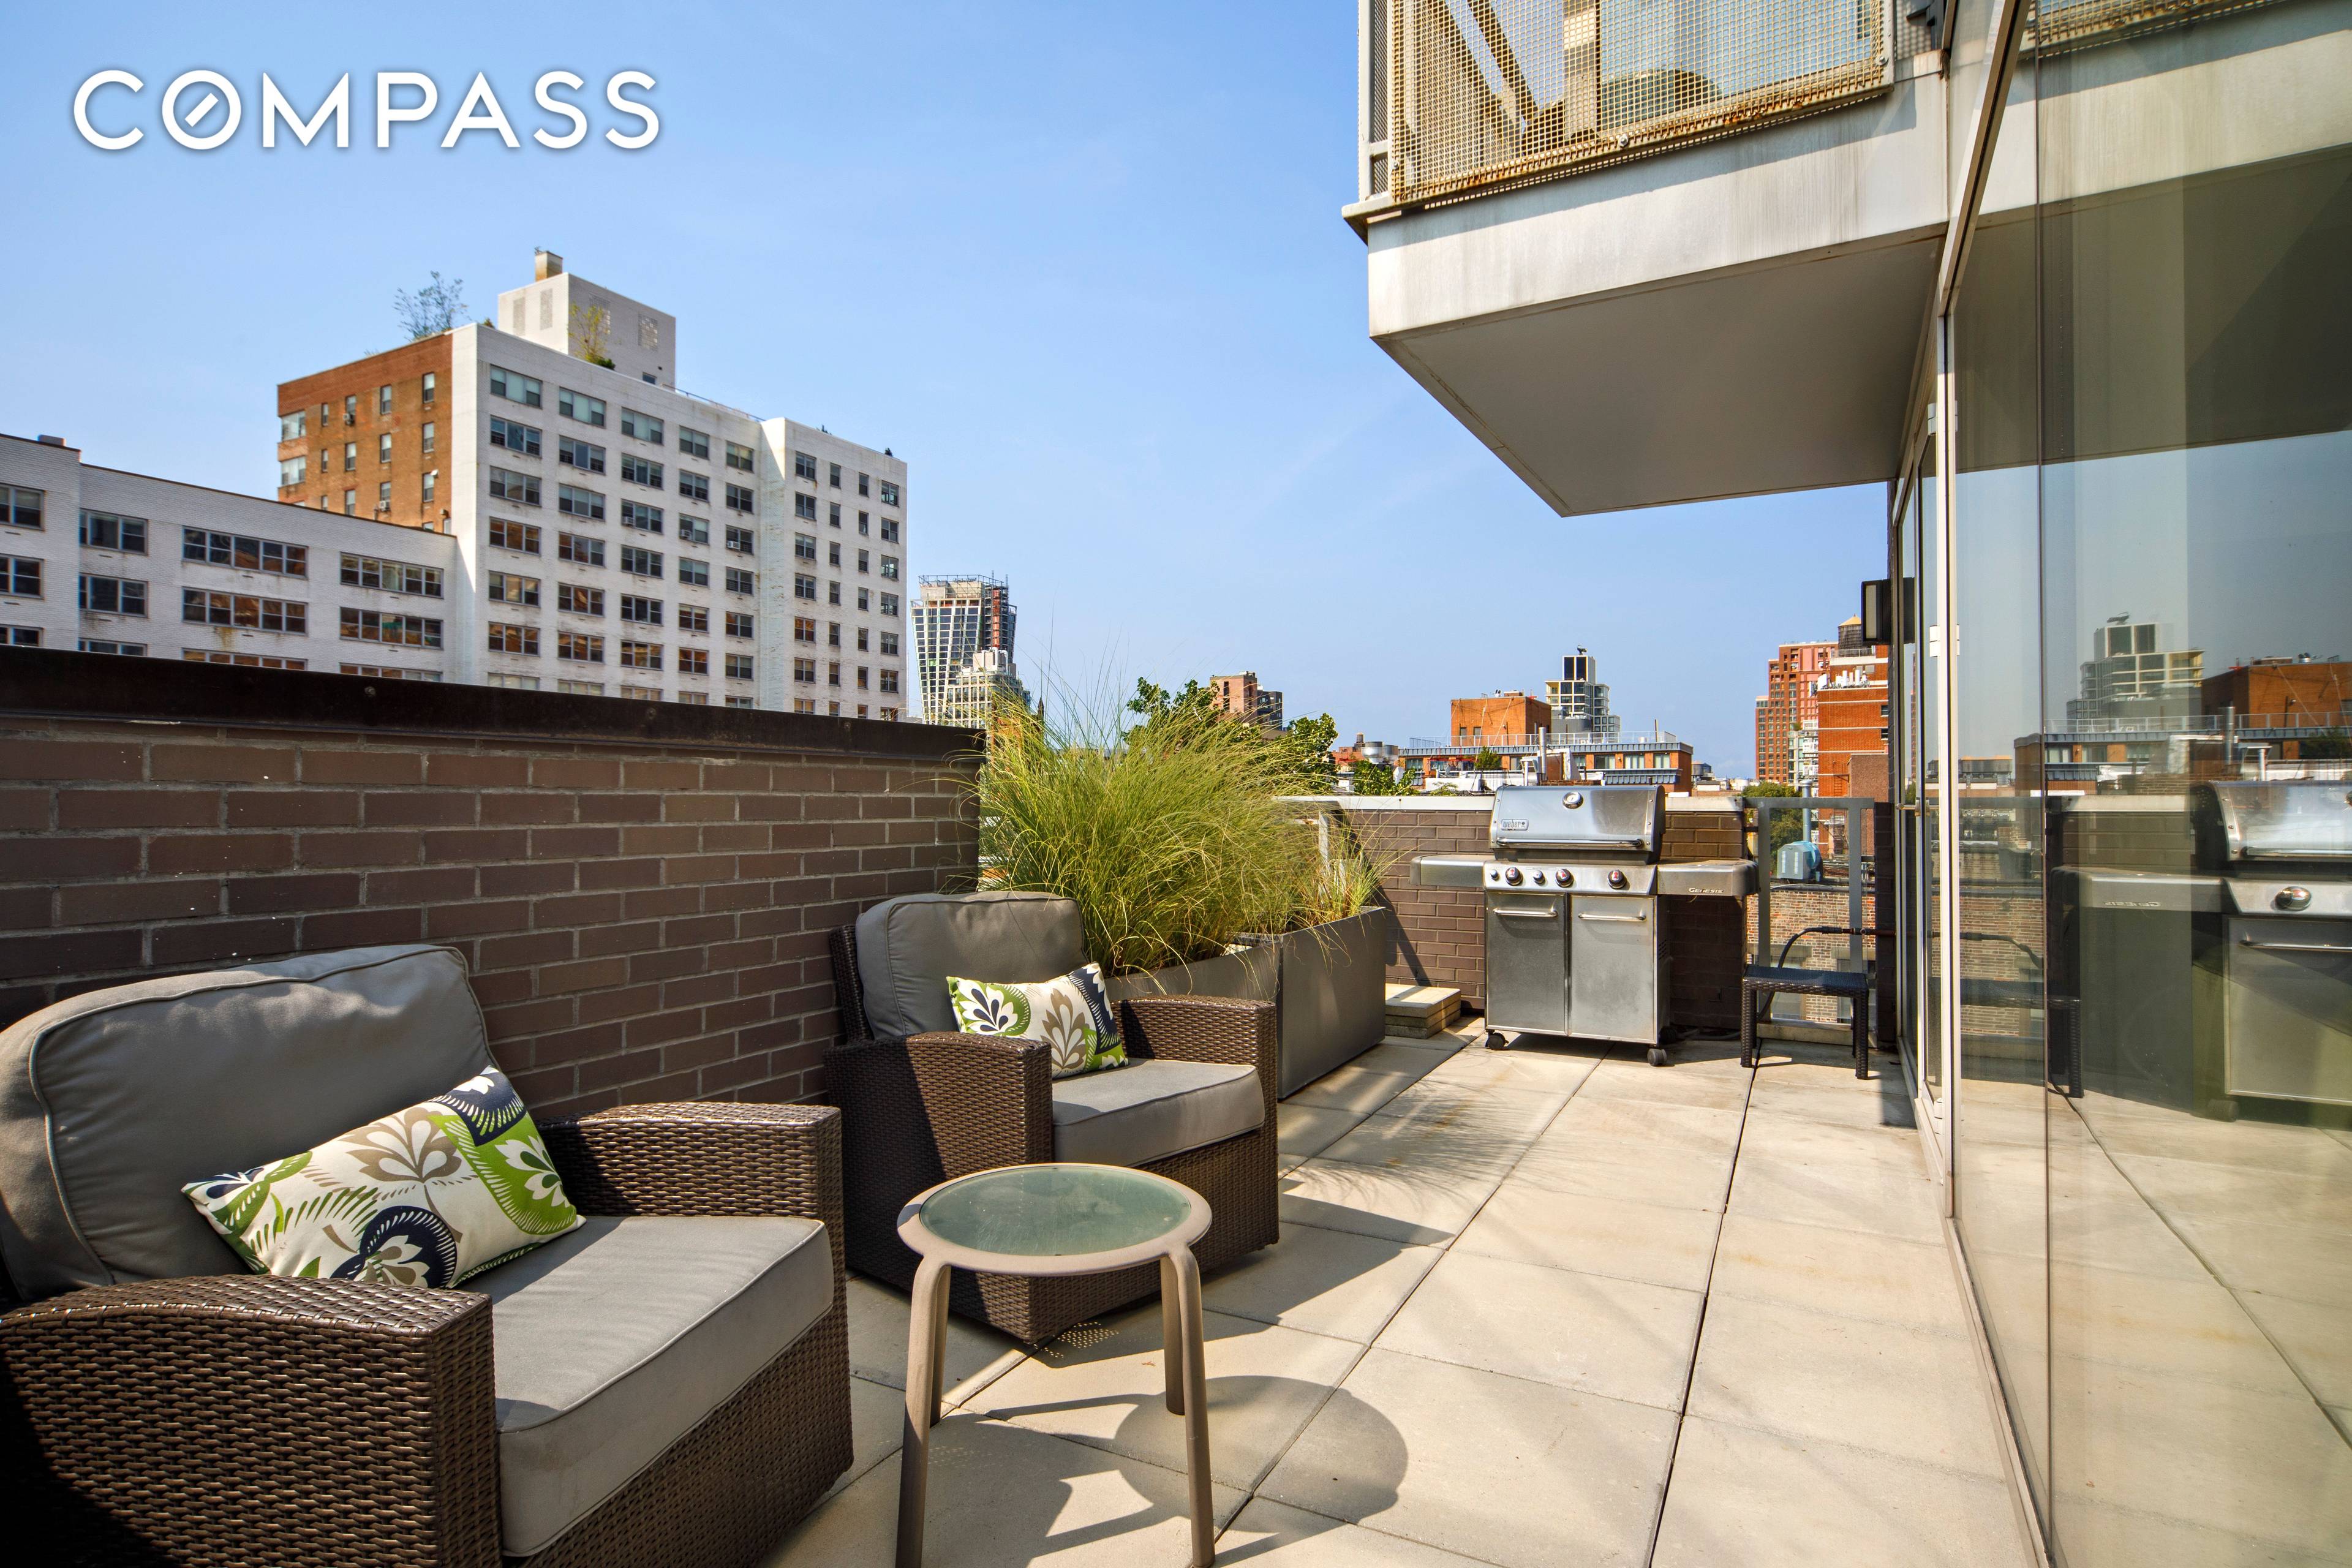 Centrally located near all of Chelsea s most iconic spots The Highline, Hudson River Park, Chelsea Market, the Chelsea Piers Sports Complex, Whole Foods and, of course, The Chelsea Art ...